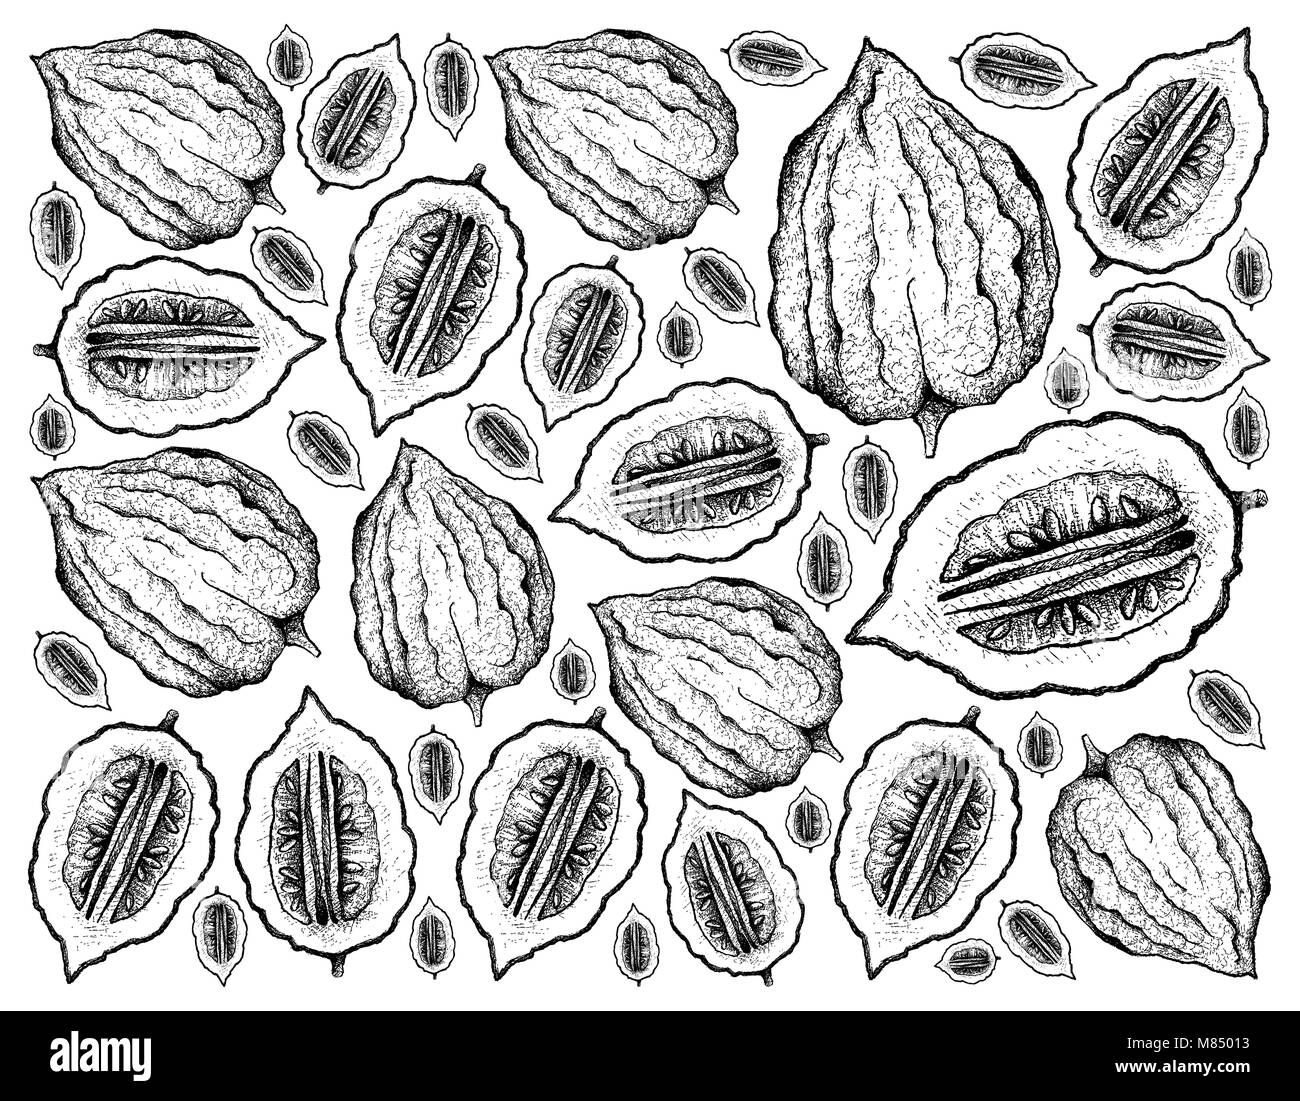 Tropical Fruit, Illustration Wallpaper Background Hand Drawn Sketch of Etrog Fruits, Essential Nutrient for Life with Vitamin C. Stock Photo